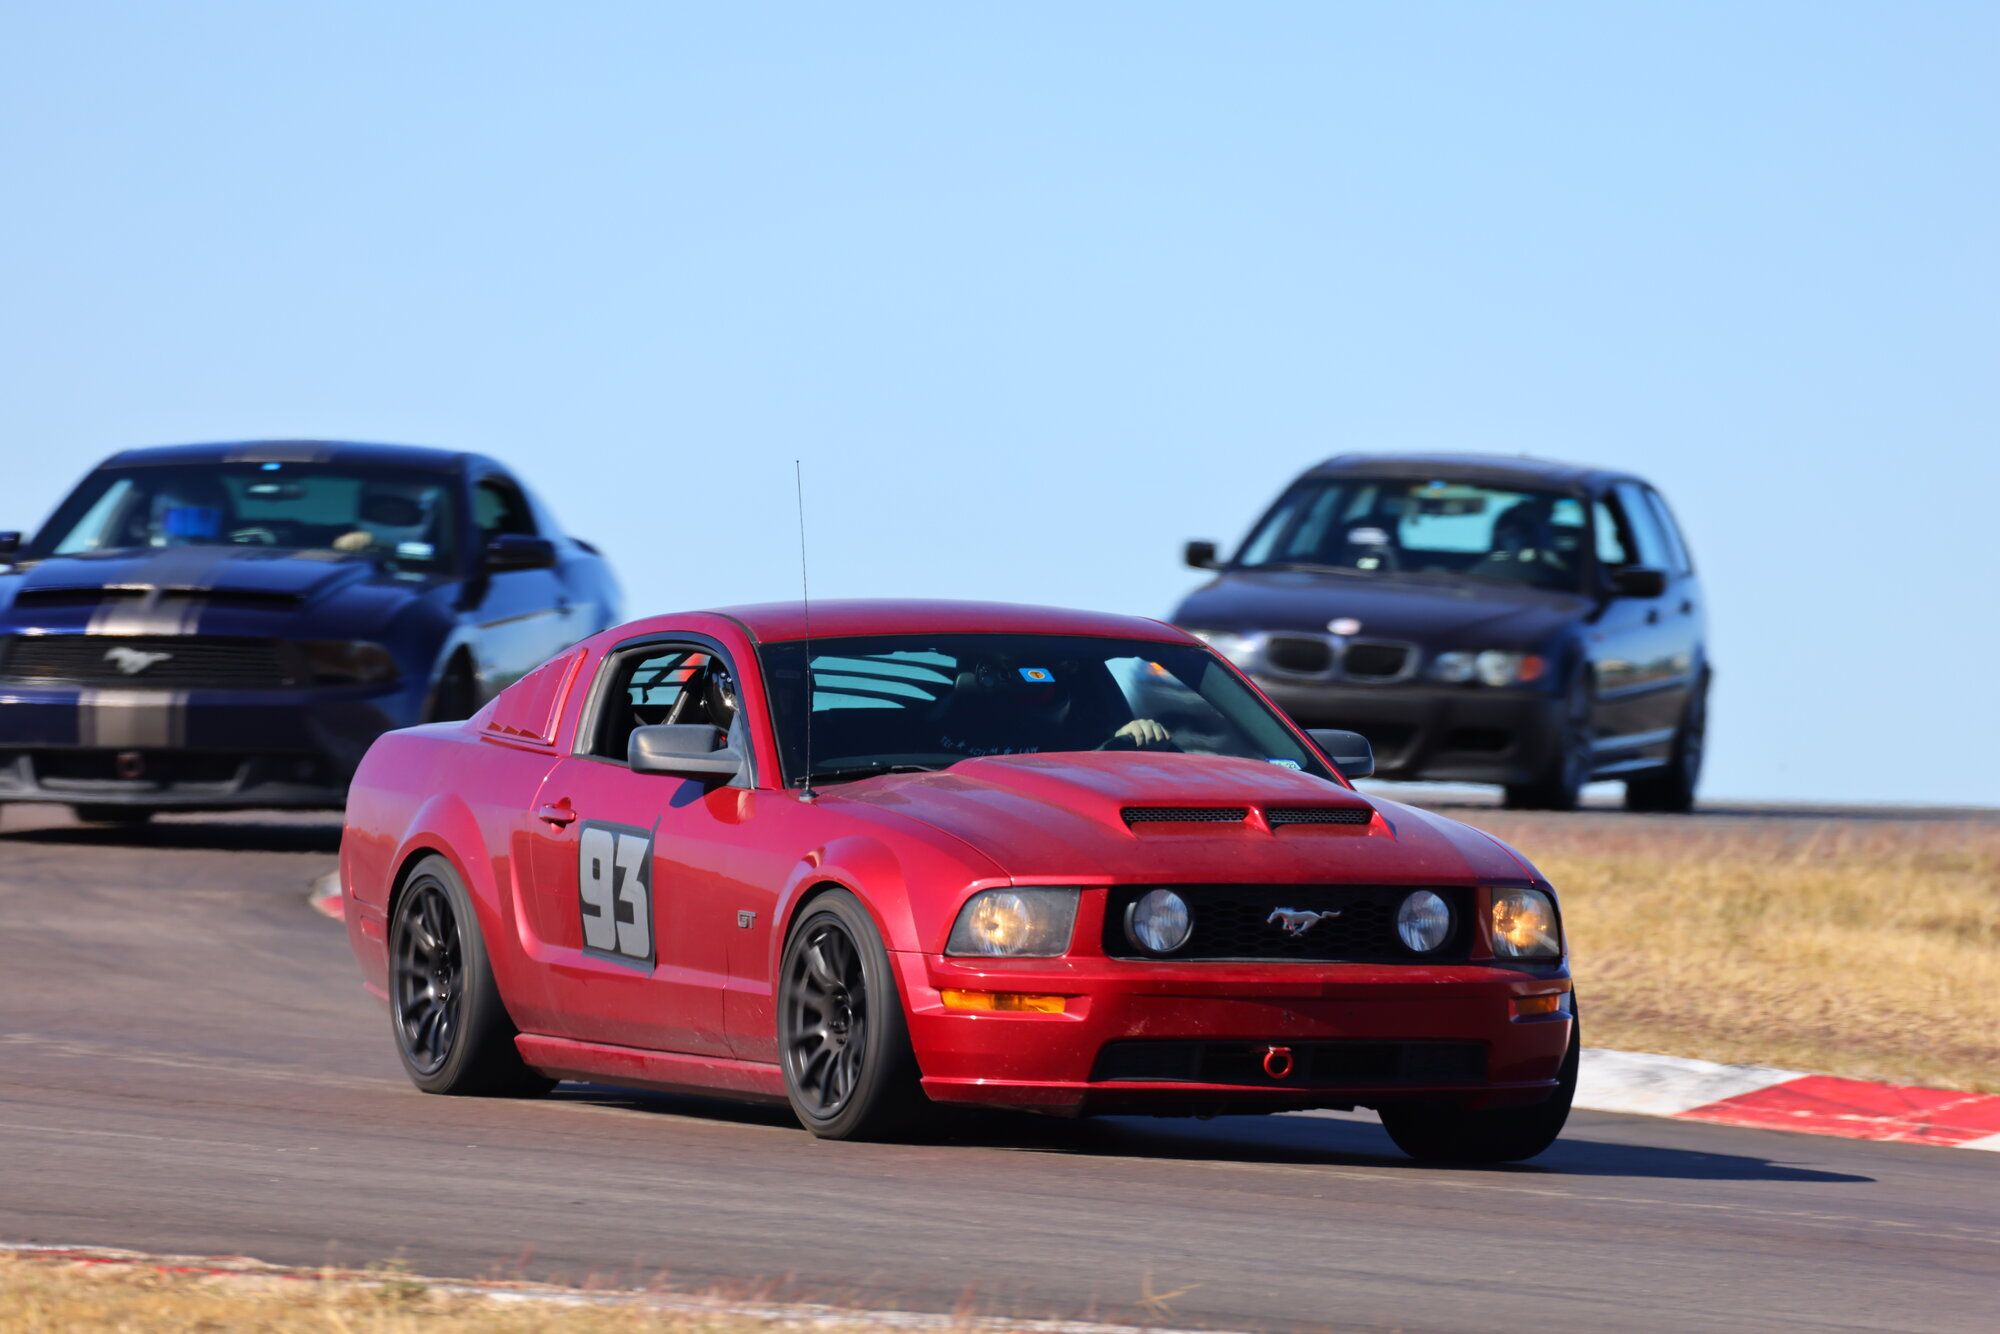 2005 Mustang
GT_46L HPDE/Track -  (A Canadian Mustang in Texas)